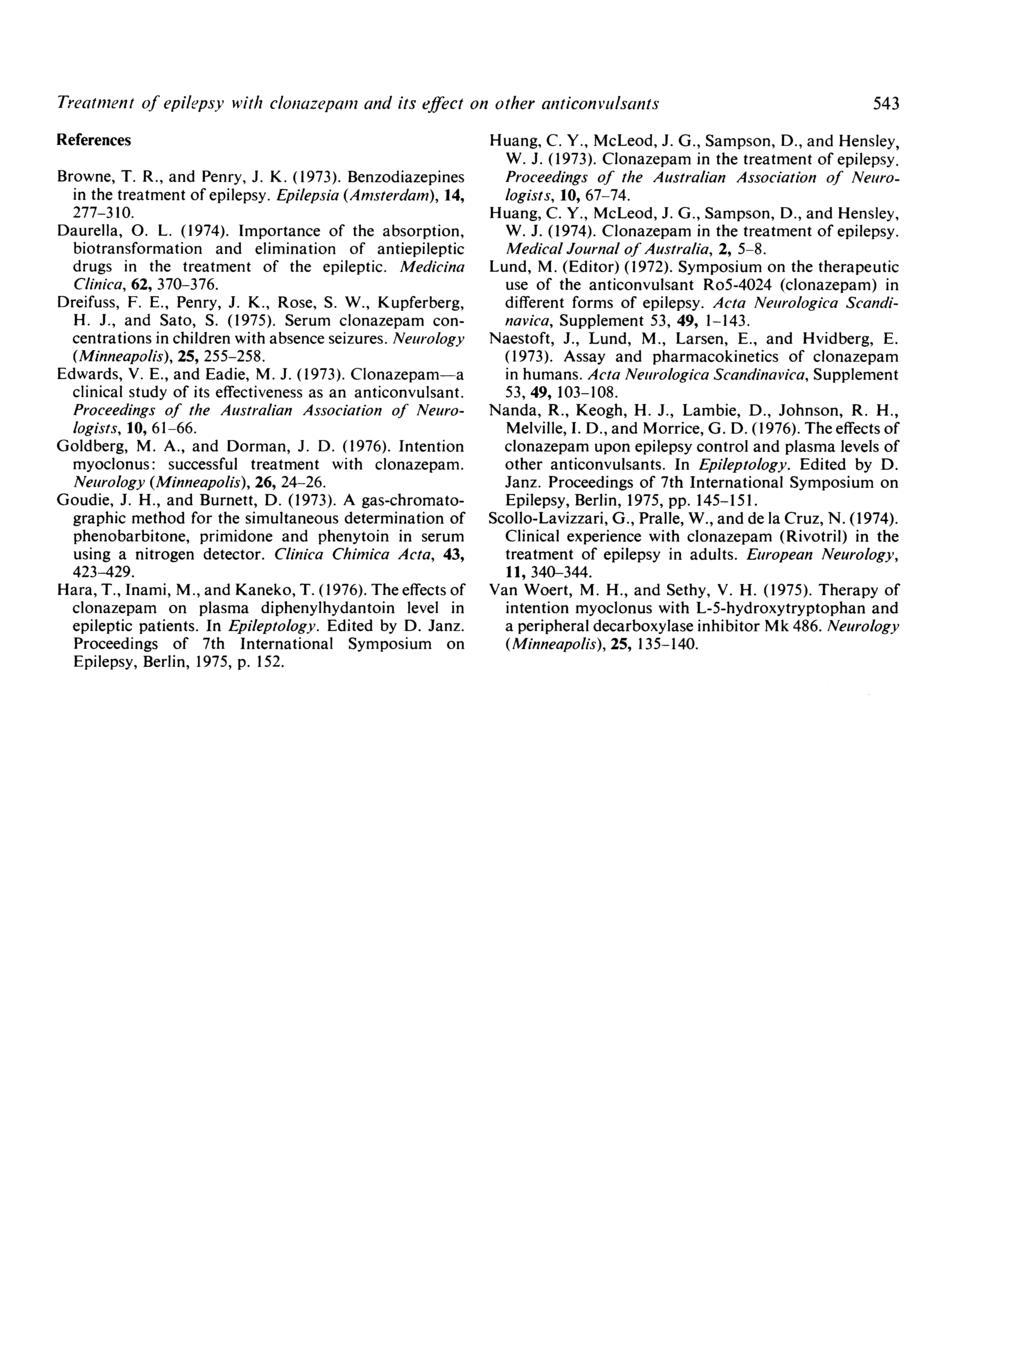 Treatmlent of epilepsy with clonazepanz and its effect on other anticonvulsants References Browne, T. R., and Penry, J. K. (1973). Benzodiazepines in the treatment of epilepsy.